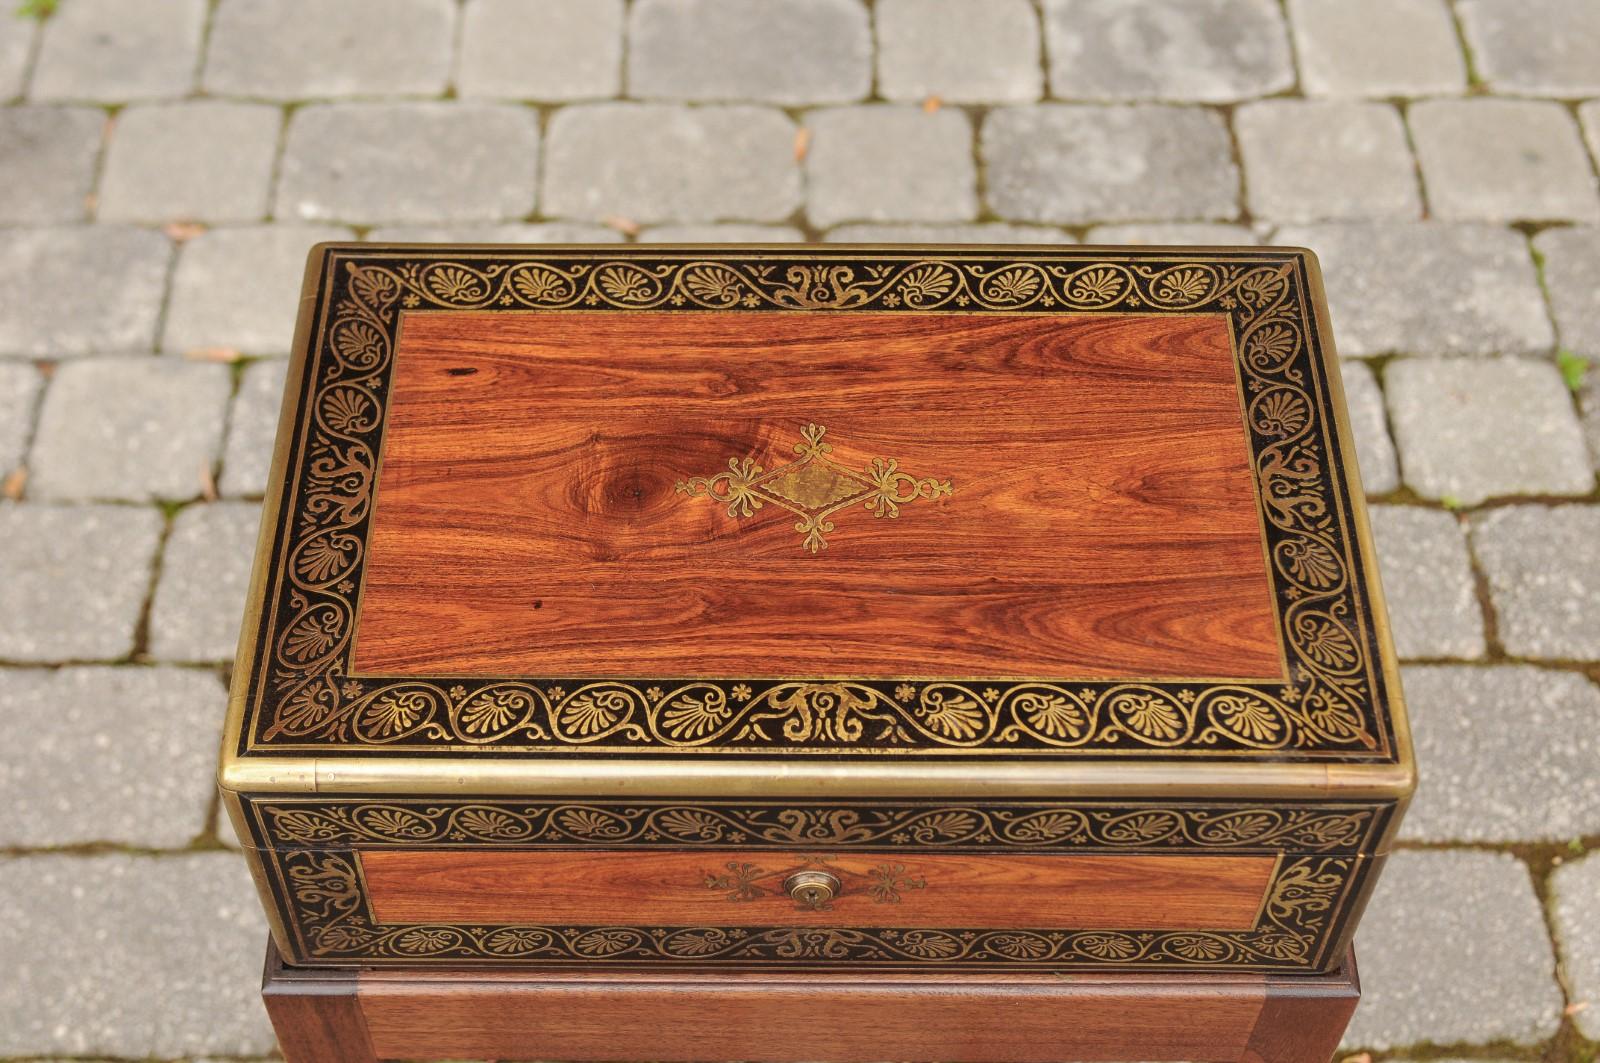 Campaign English Mahogany Lap Desk circa 1870 with Gilded Accents and Custom-Made Base